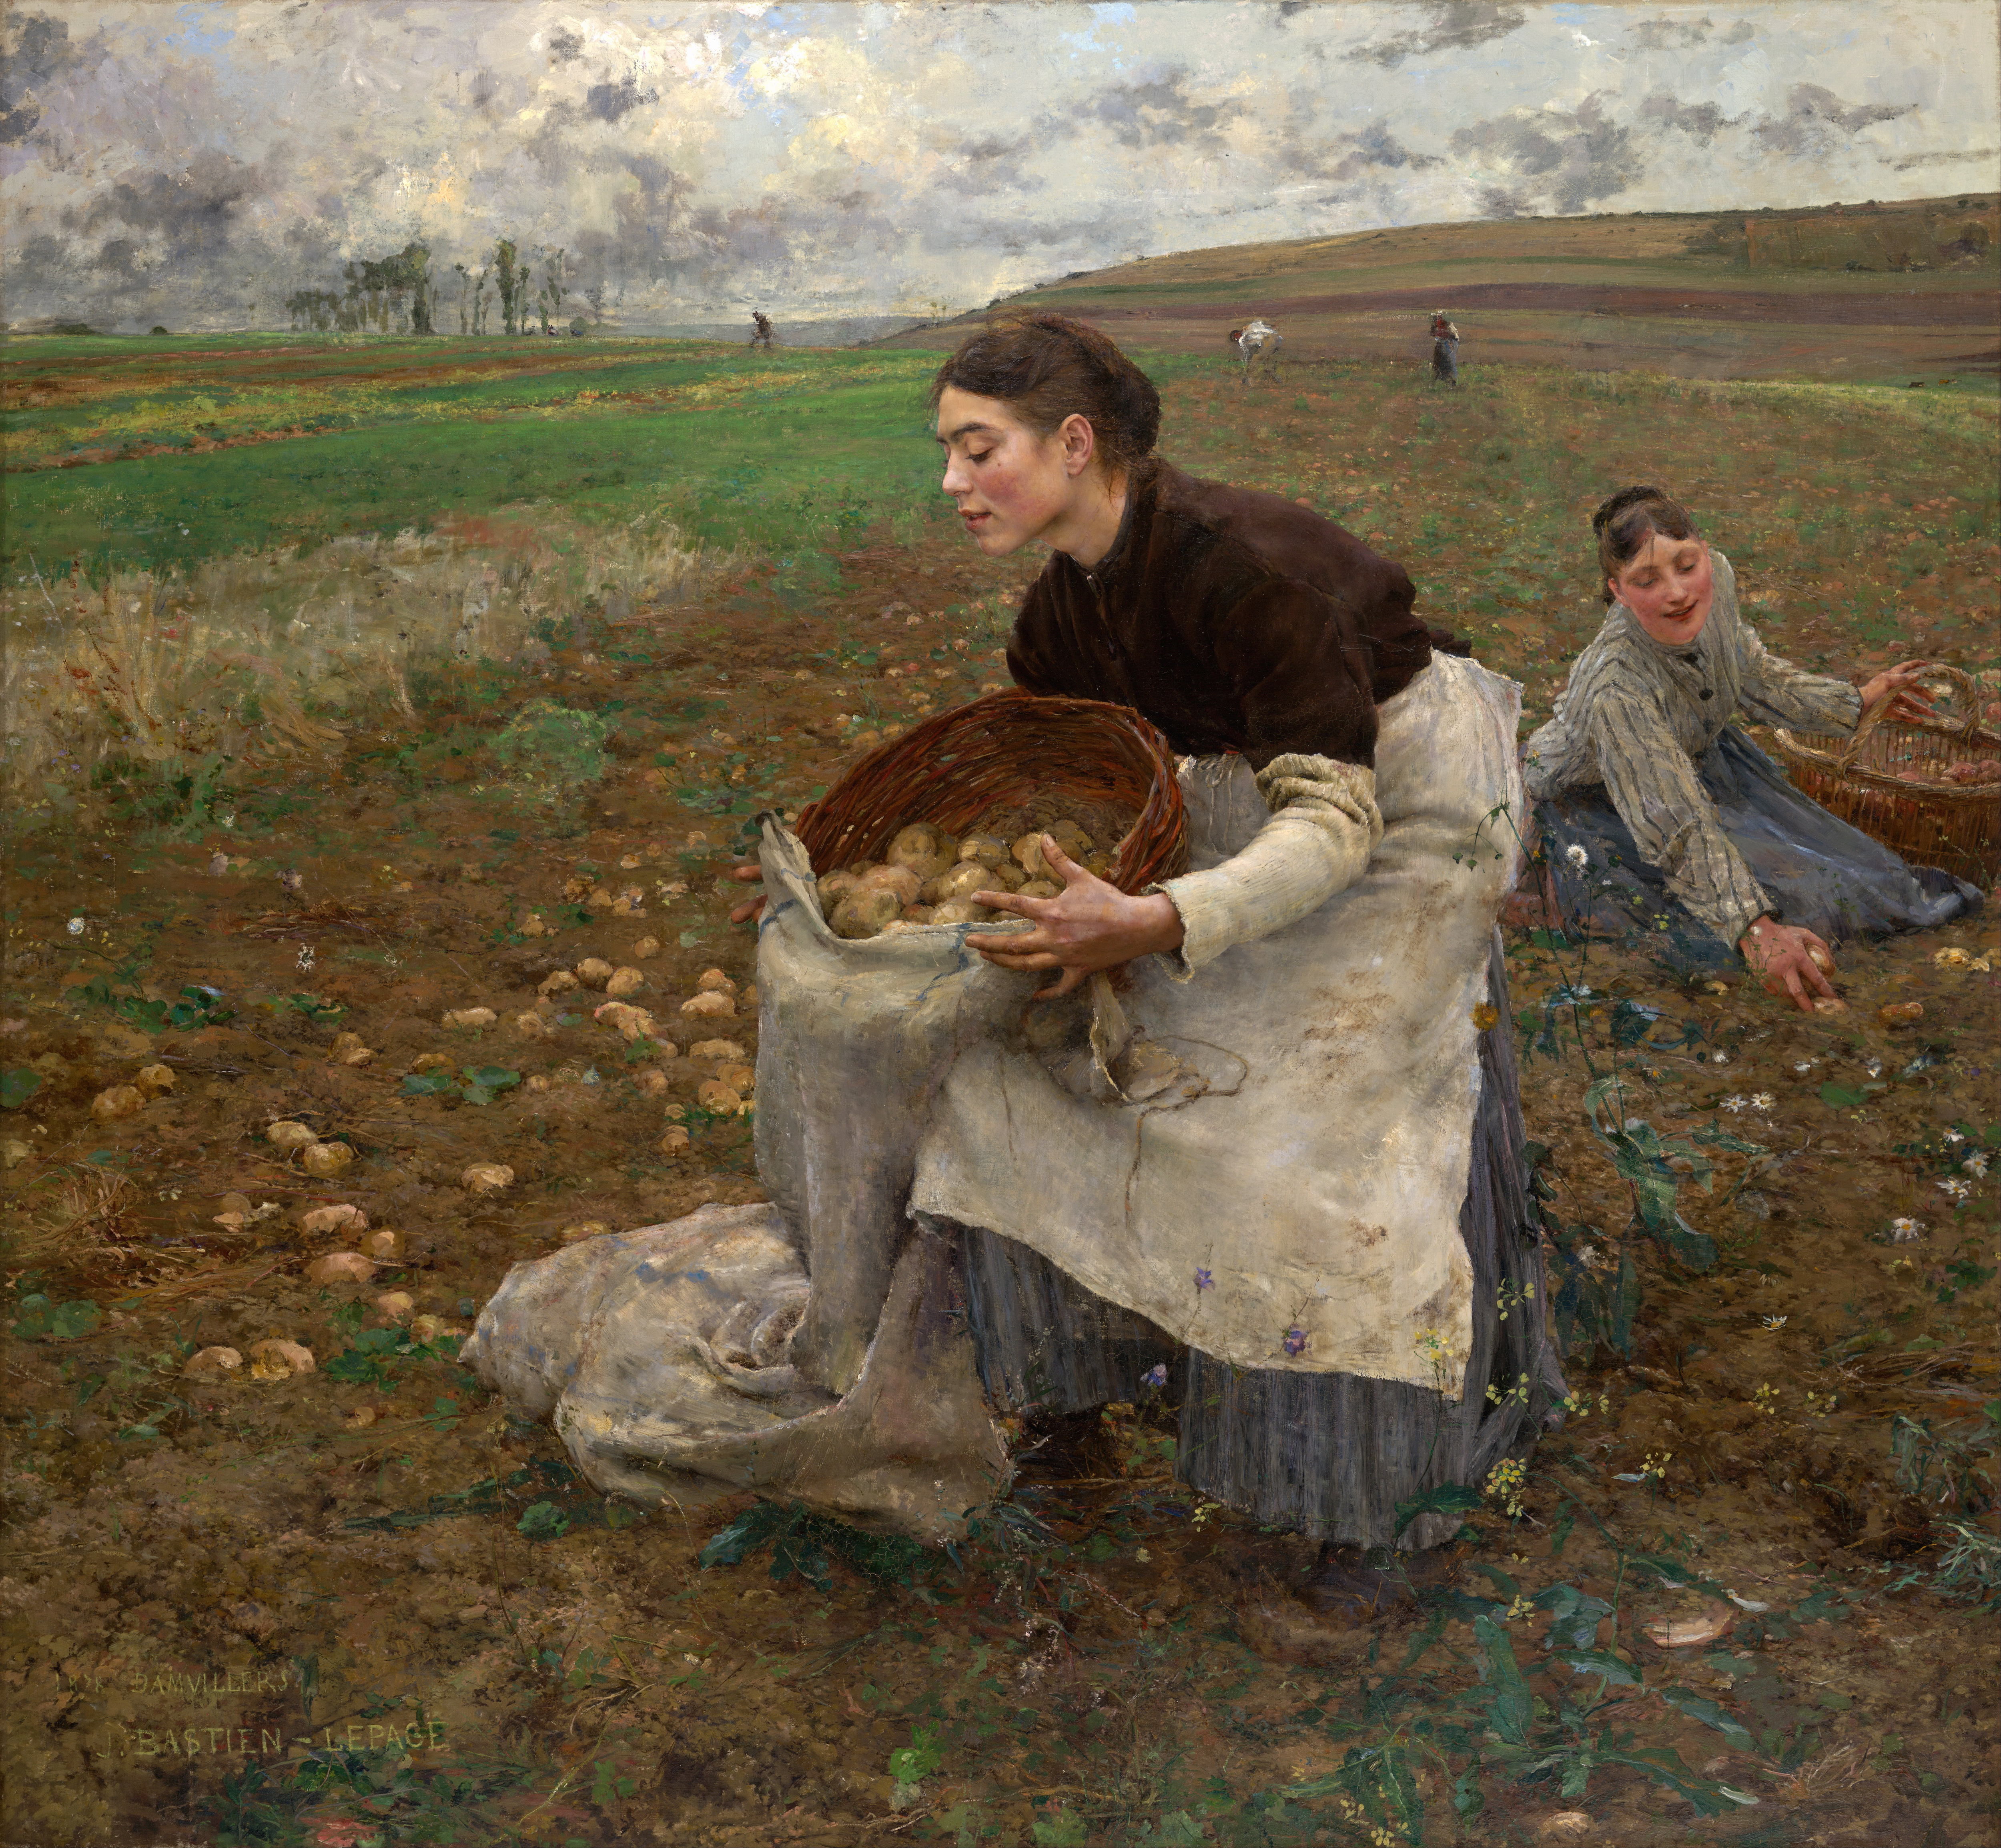 October by Jules Bastien-Lepage - 1878 - 196 x 180.7 cm National Gallery of Victoria